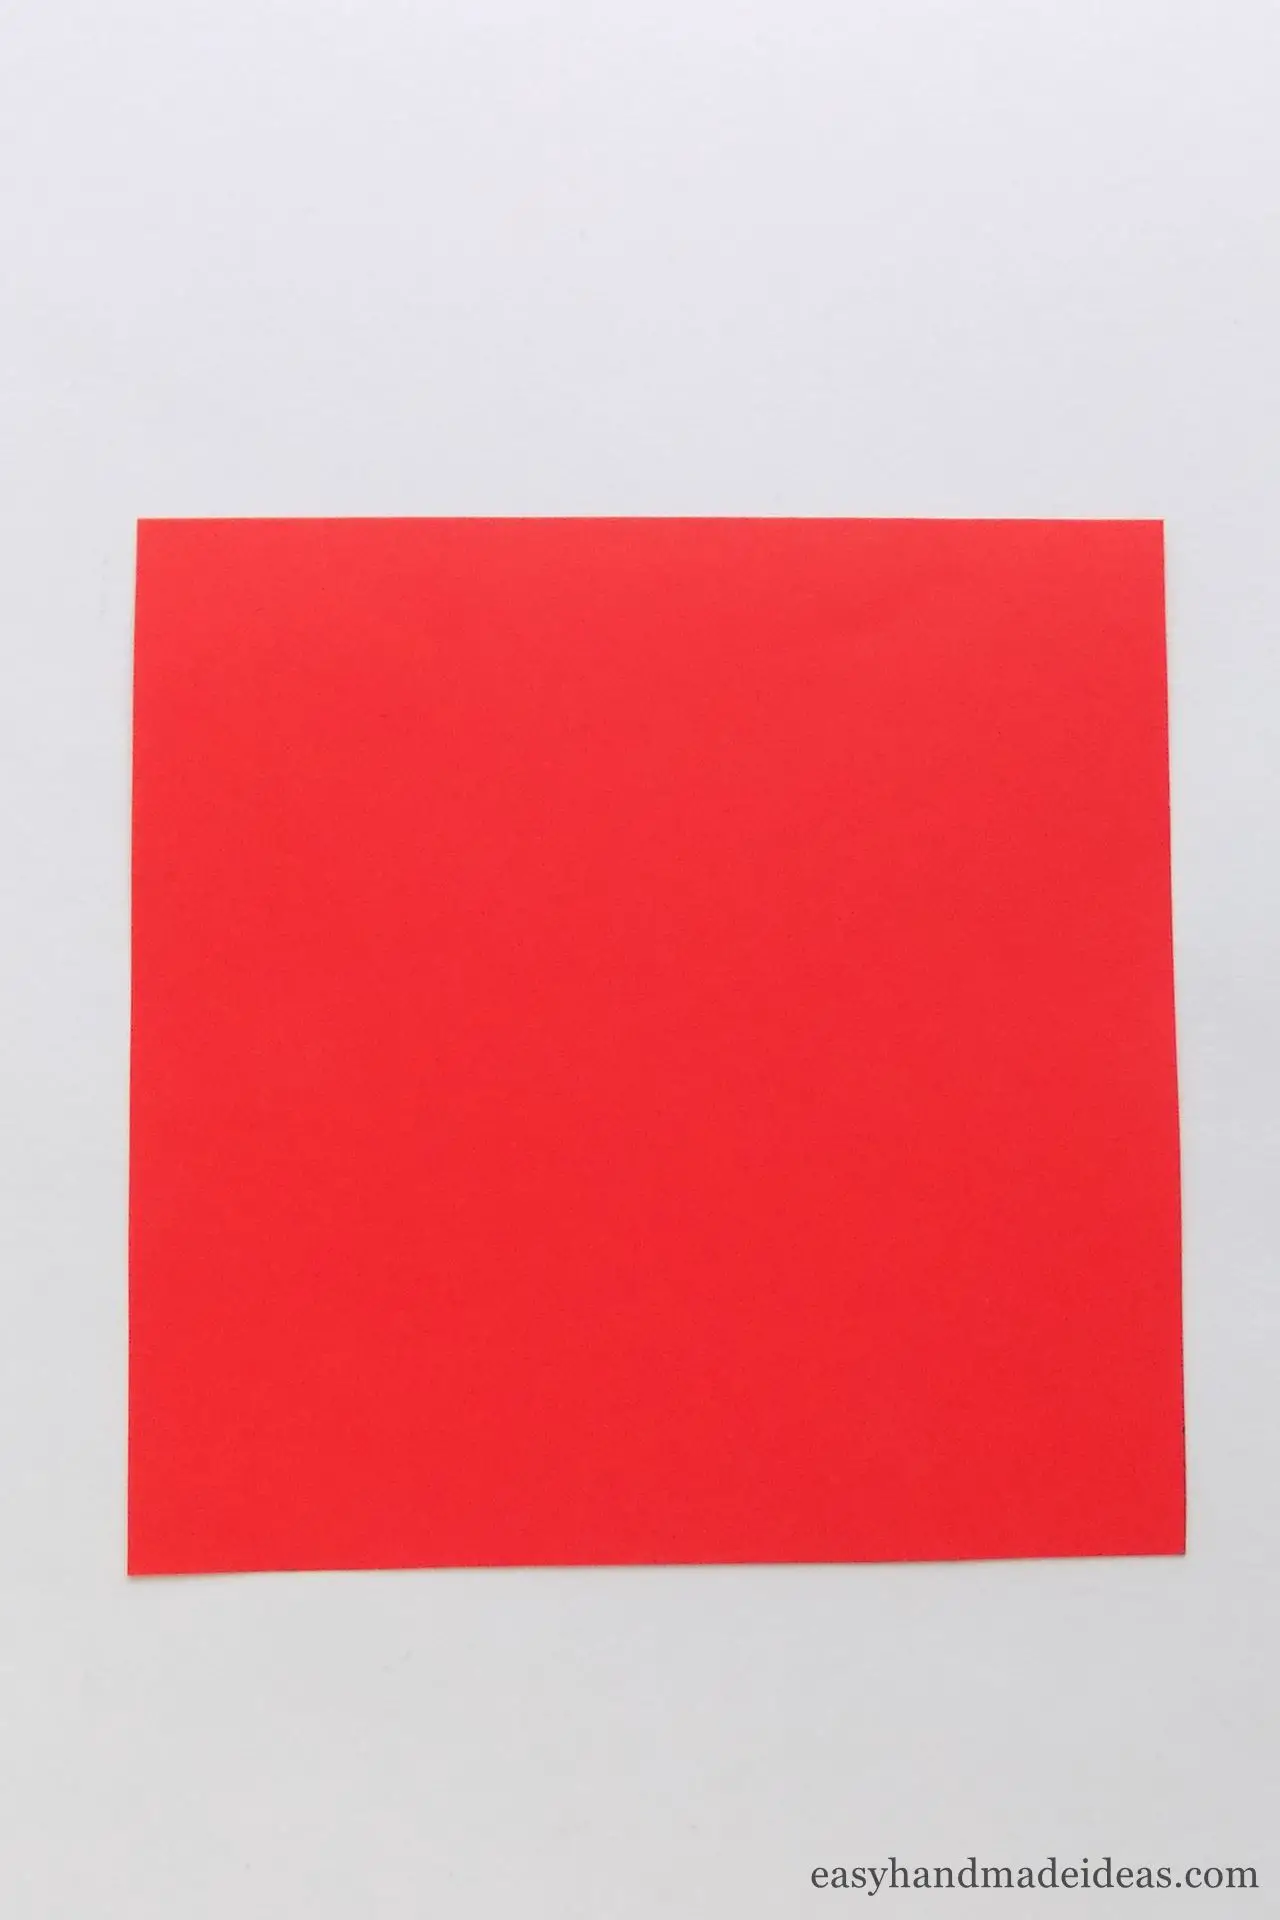 A red square of paper